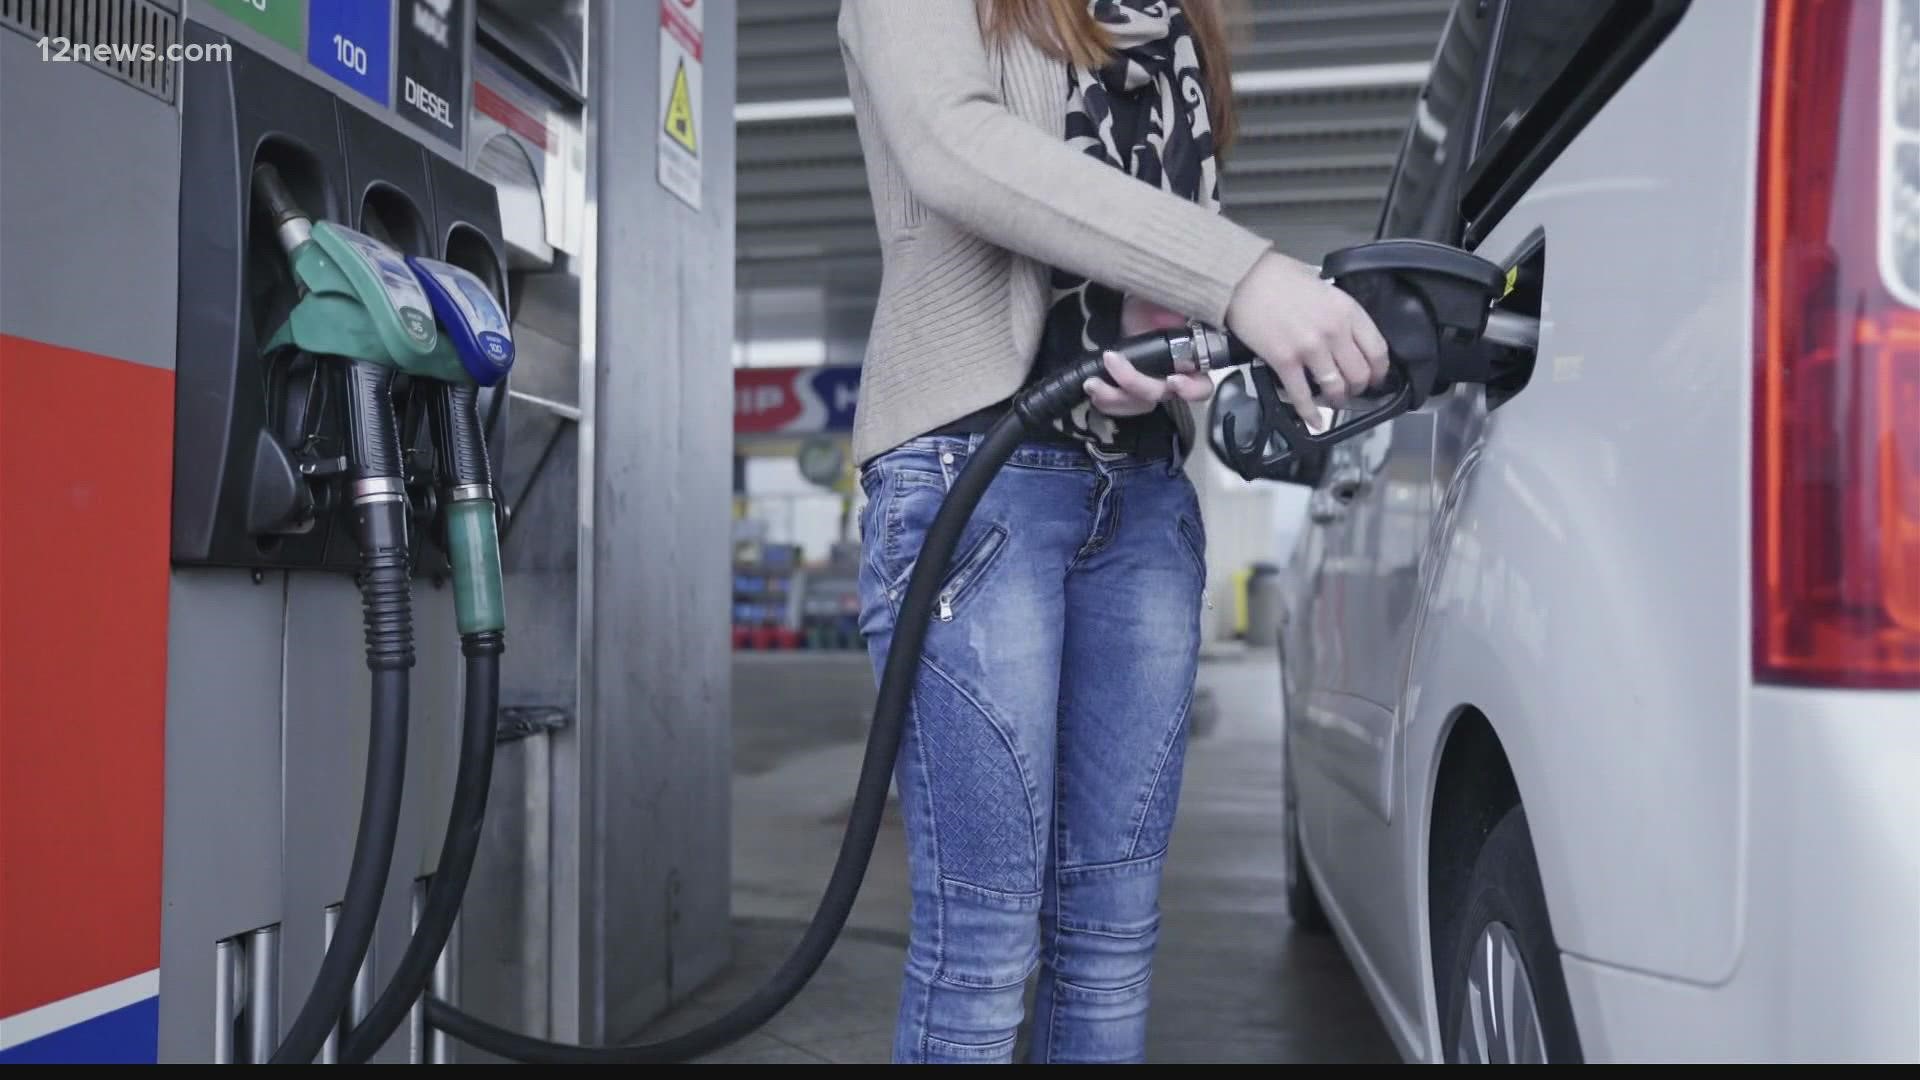 With the price of gas skyrocketing to an eight-year high, gas insiders share secrets to help you fill your tank without emptying your wallet.